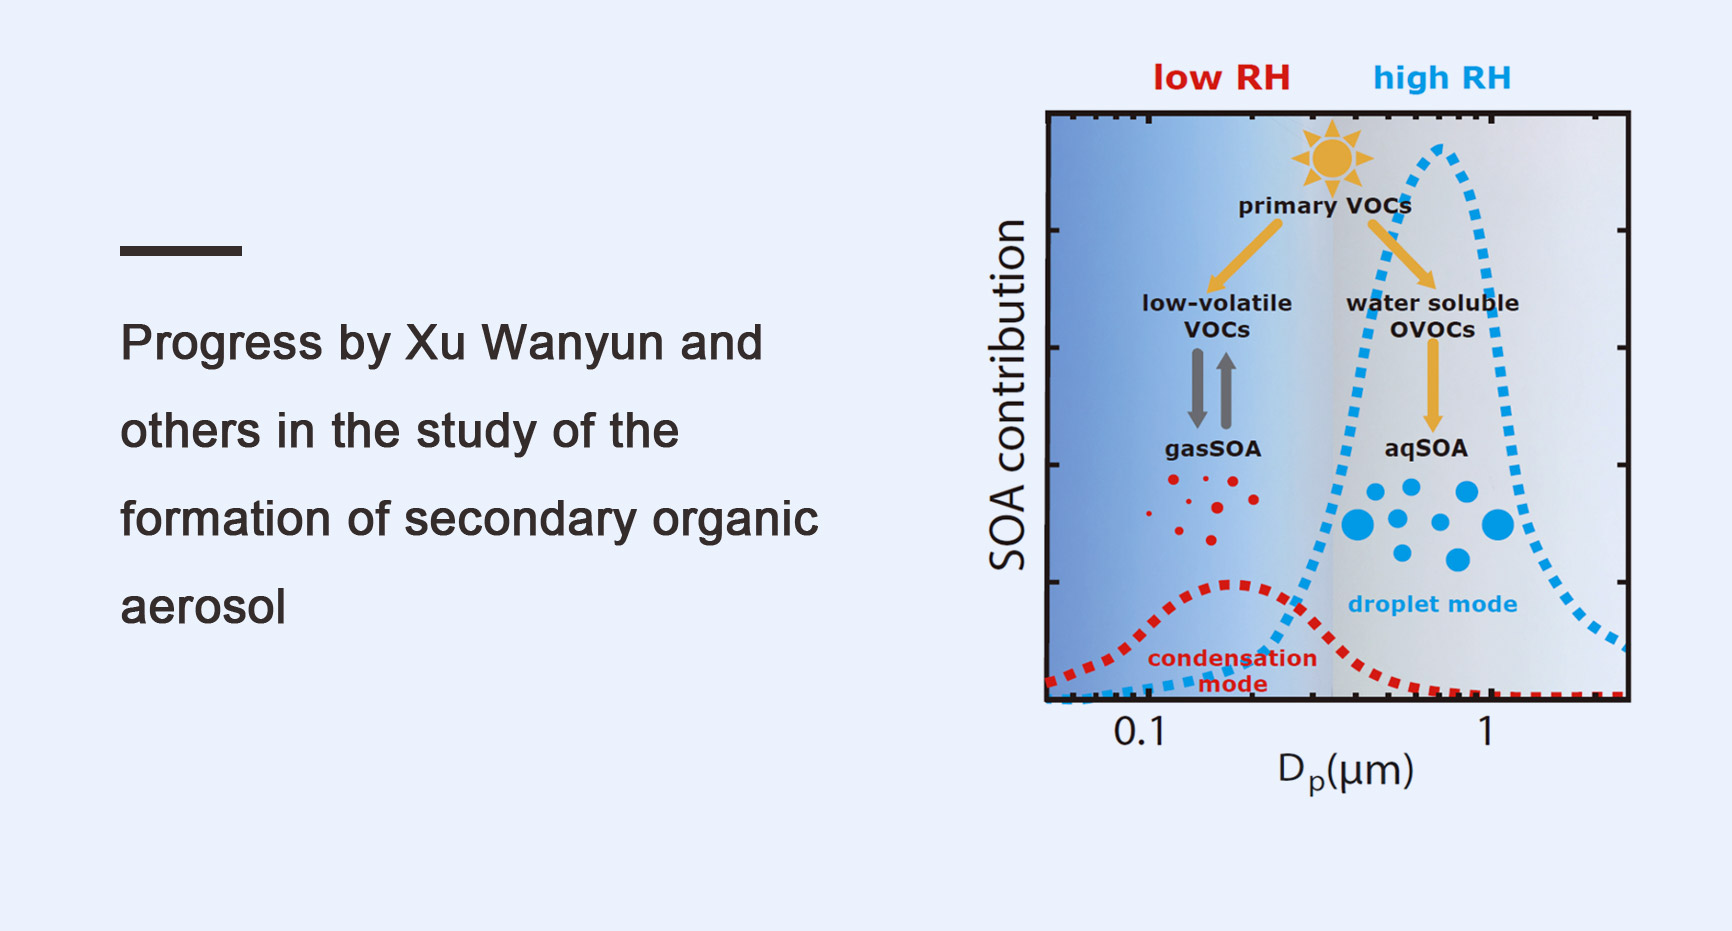 Progress	by	Xu	Wanyun	and	others	in	the	study	of	the	formation	of	secondary	organic	aerosol